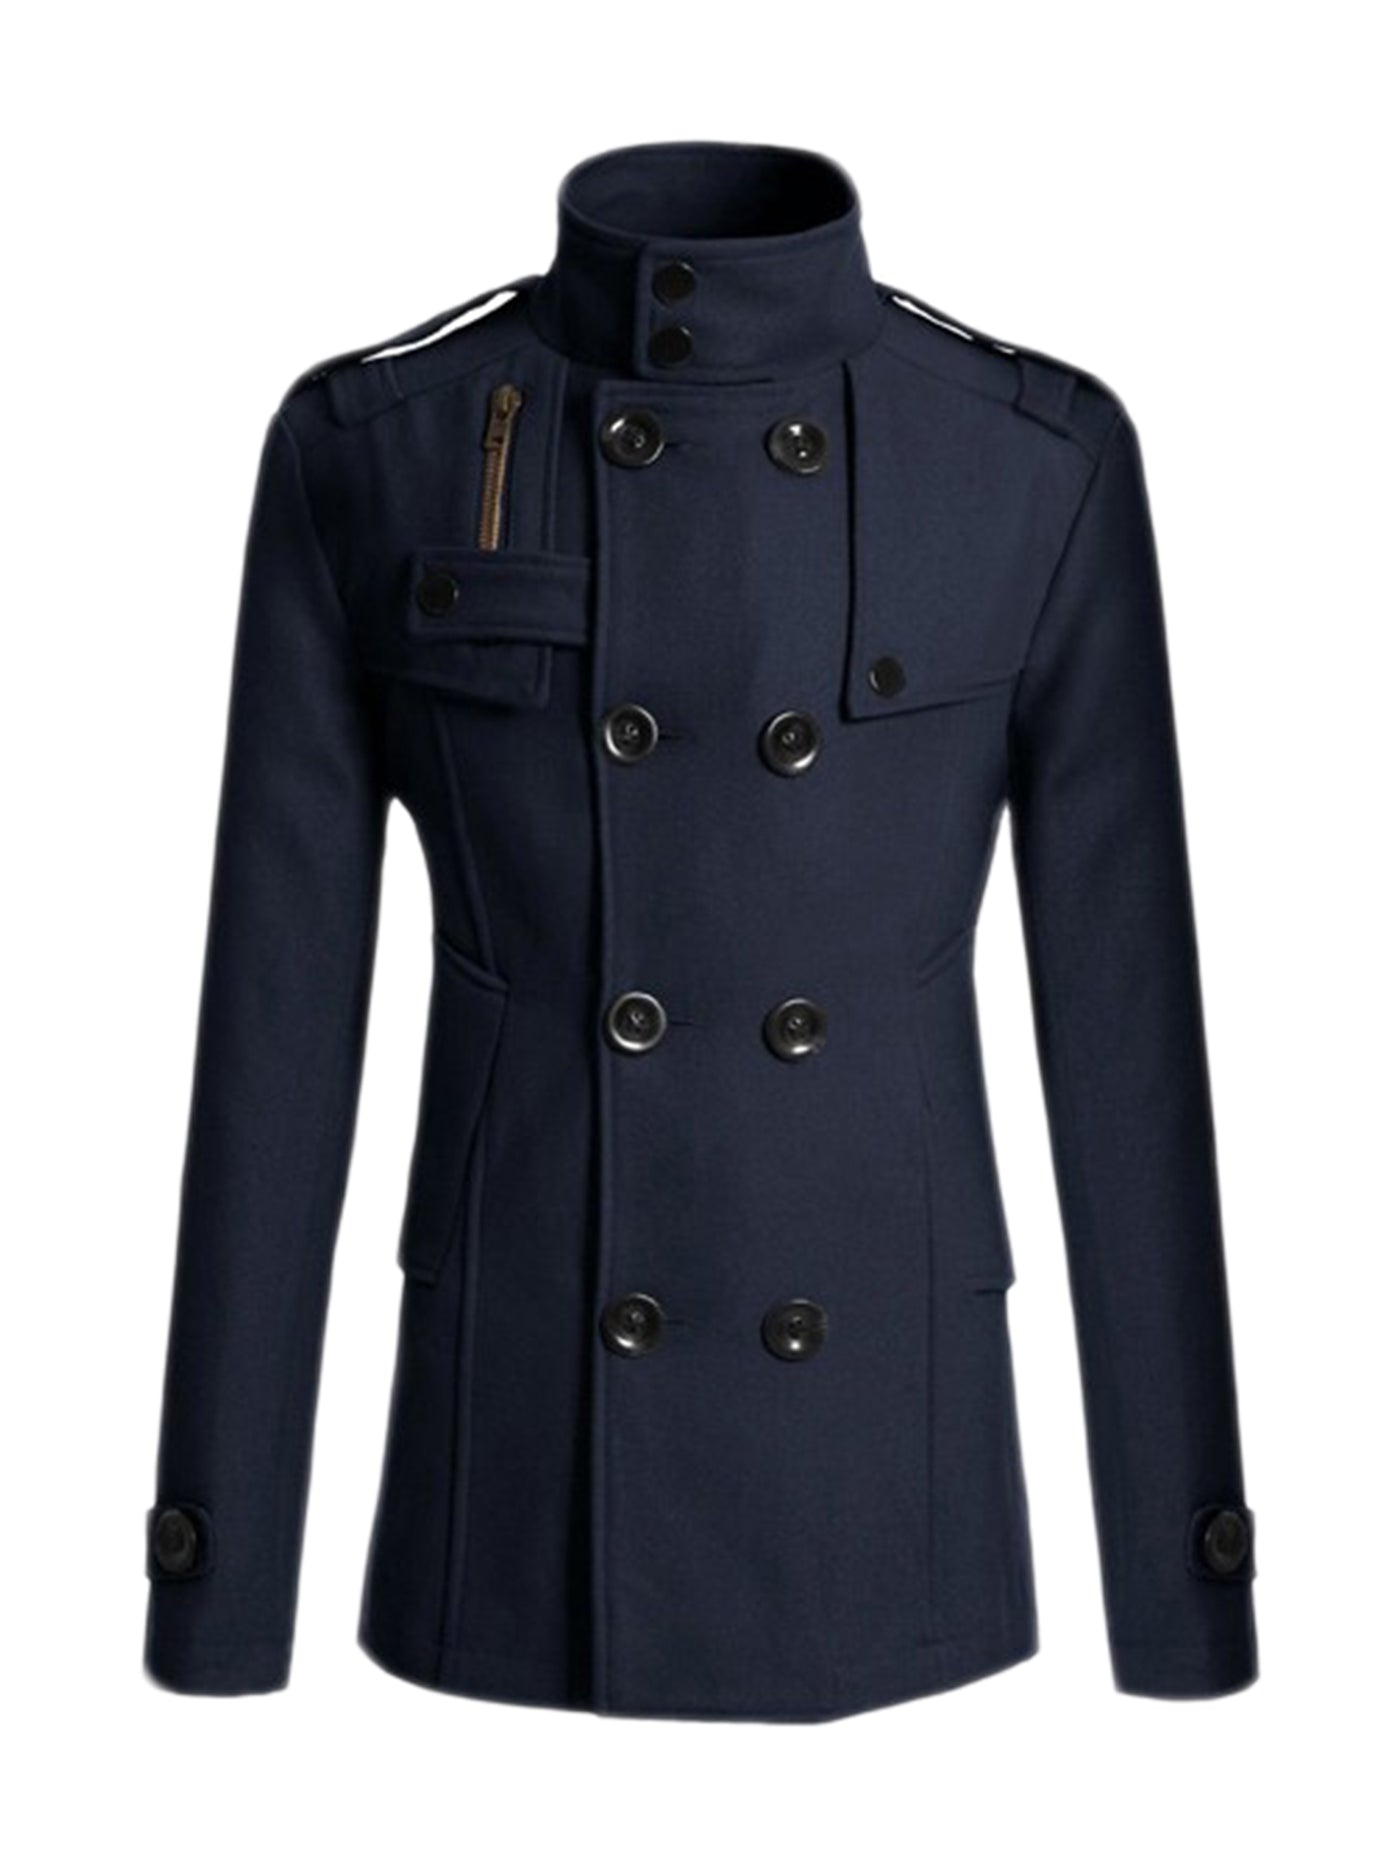 Bublédon Men's Winter Trench Coat Stand Collar Double Breasted Notch Lapel Pea Coats